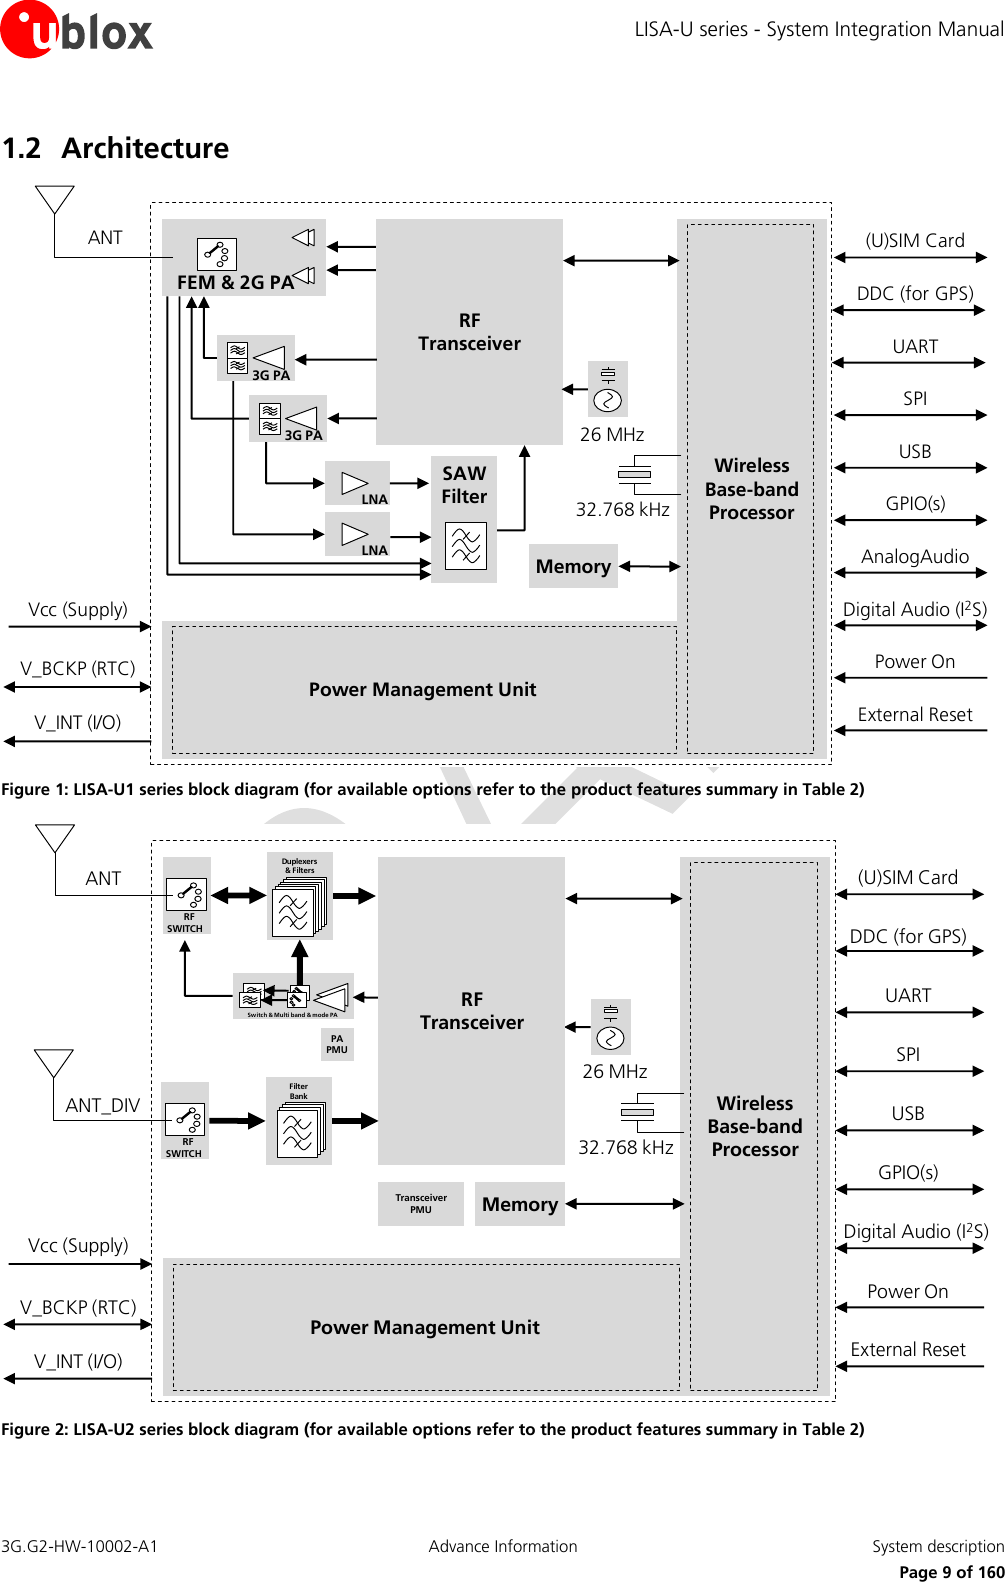 LISA-U series - System Integration Manual 3G.G2-HW-10002-A1  Advance Information  System description      Page 9 of 160 1.2 Architecture WirelessBase-bandProcessorMemoryPower Management UnitRF Transceiver26 MHz32.768 kHzSAWFilterFEM &amp; 2G PAANTLNA3G PALNA3G PADDC (for GPS)(U)SIM CardUARTSPIUSBGPIO(s)Power OnExternal ResetV_BCKP (RTC)Vcc (Supply)V_INT (I/O)Digital Audio (I2S)AnalogAudio Figure 1: LISA-U1 series block diagram (for available options refer to the product features summary in Table 2) WirelessBase-bandProcessorMemoryPower Management Unit26 MHz32.768 kHzANTSwitch &amp; Multi band &amp; mode PADDC (for GPS)(U)SIM CardUARTSPIUSBGPIO(s)Power OnExternal ResetV_BCKP (RTC)Vcc (Supply)V_INT (I/O)Digital Audio (I2S)RFSWITCHRF TransceiverDuplexers&amp; FiltersANT_DIVRFSWITCHFilterBankPA PMUTransceiver PMU Figure 2: LISA-U2 series block diagram (for available options refer to the product features summary in Table 2)  